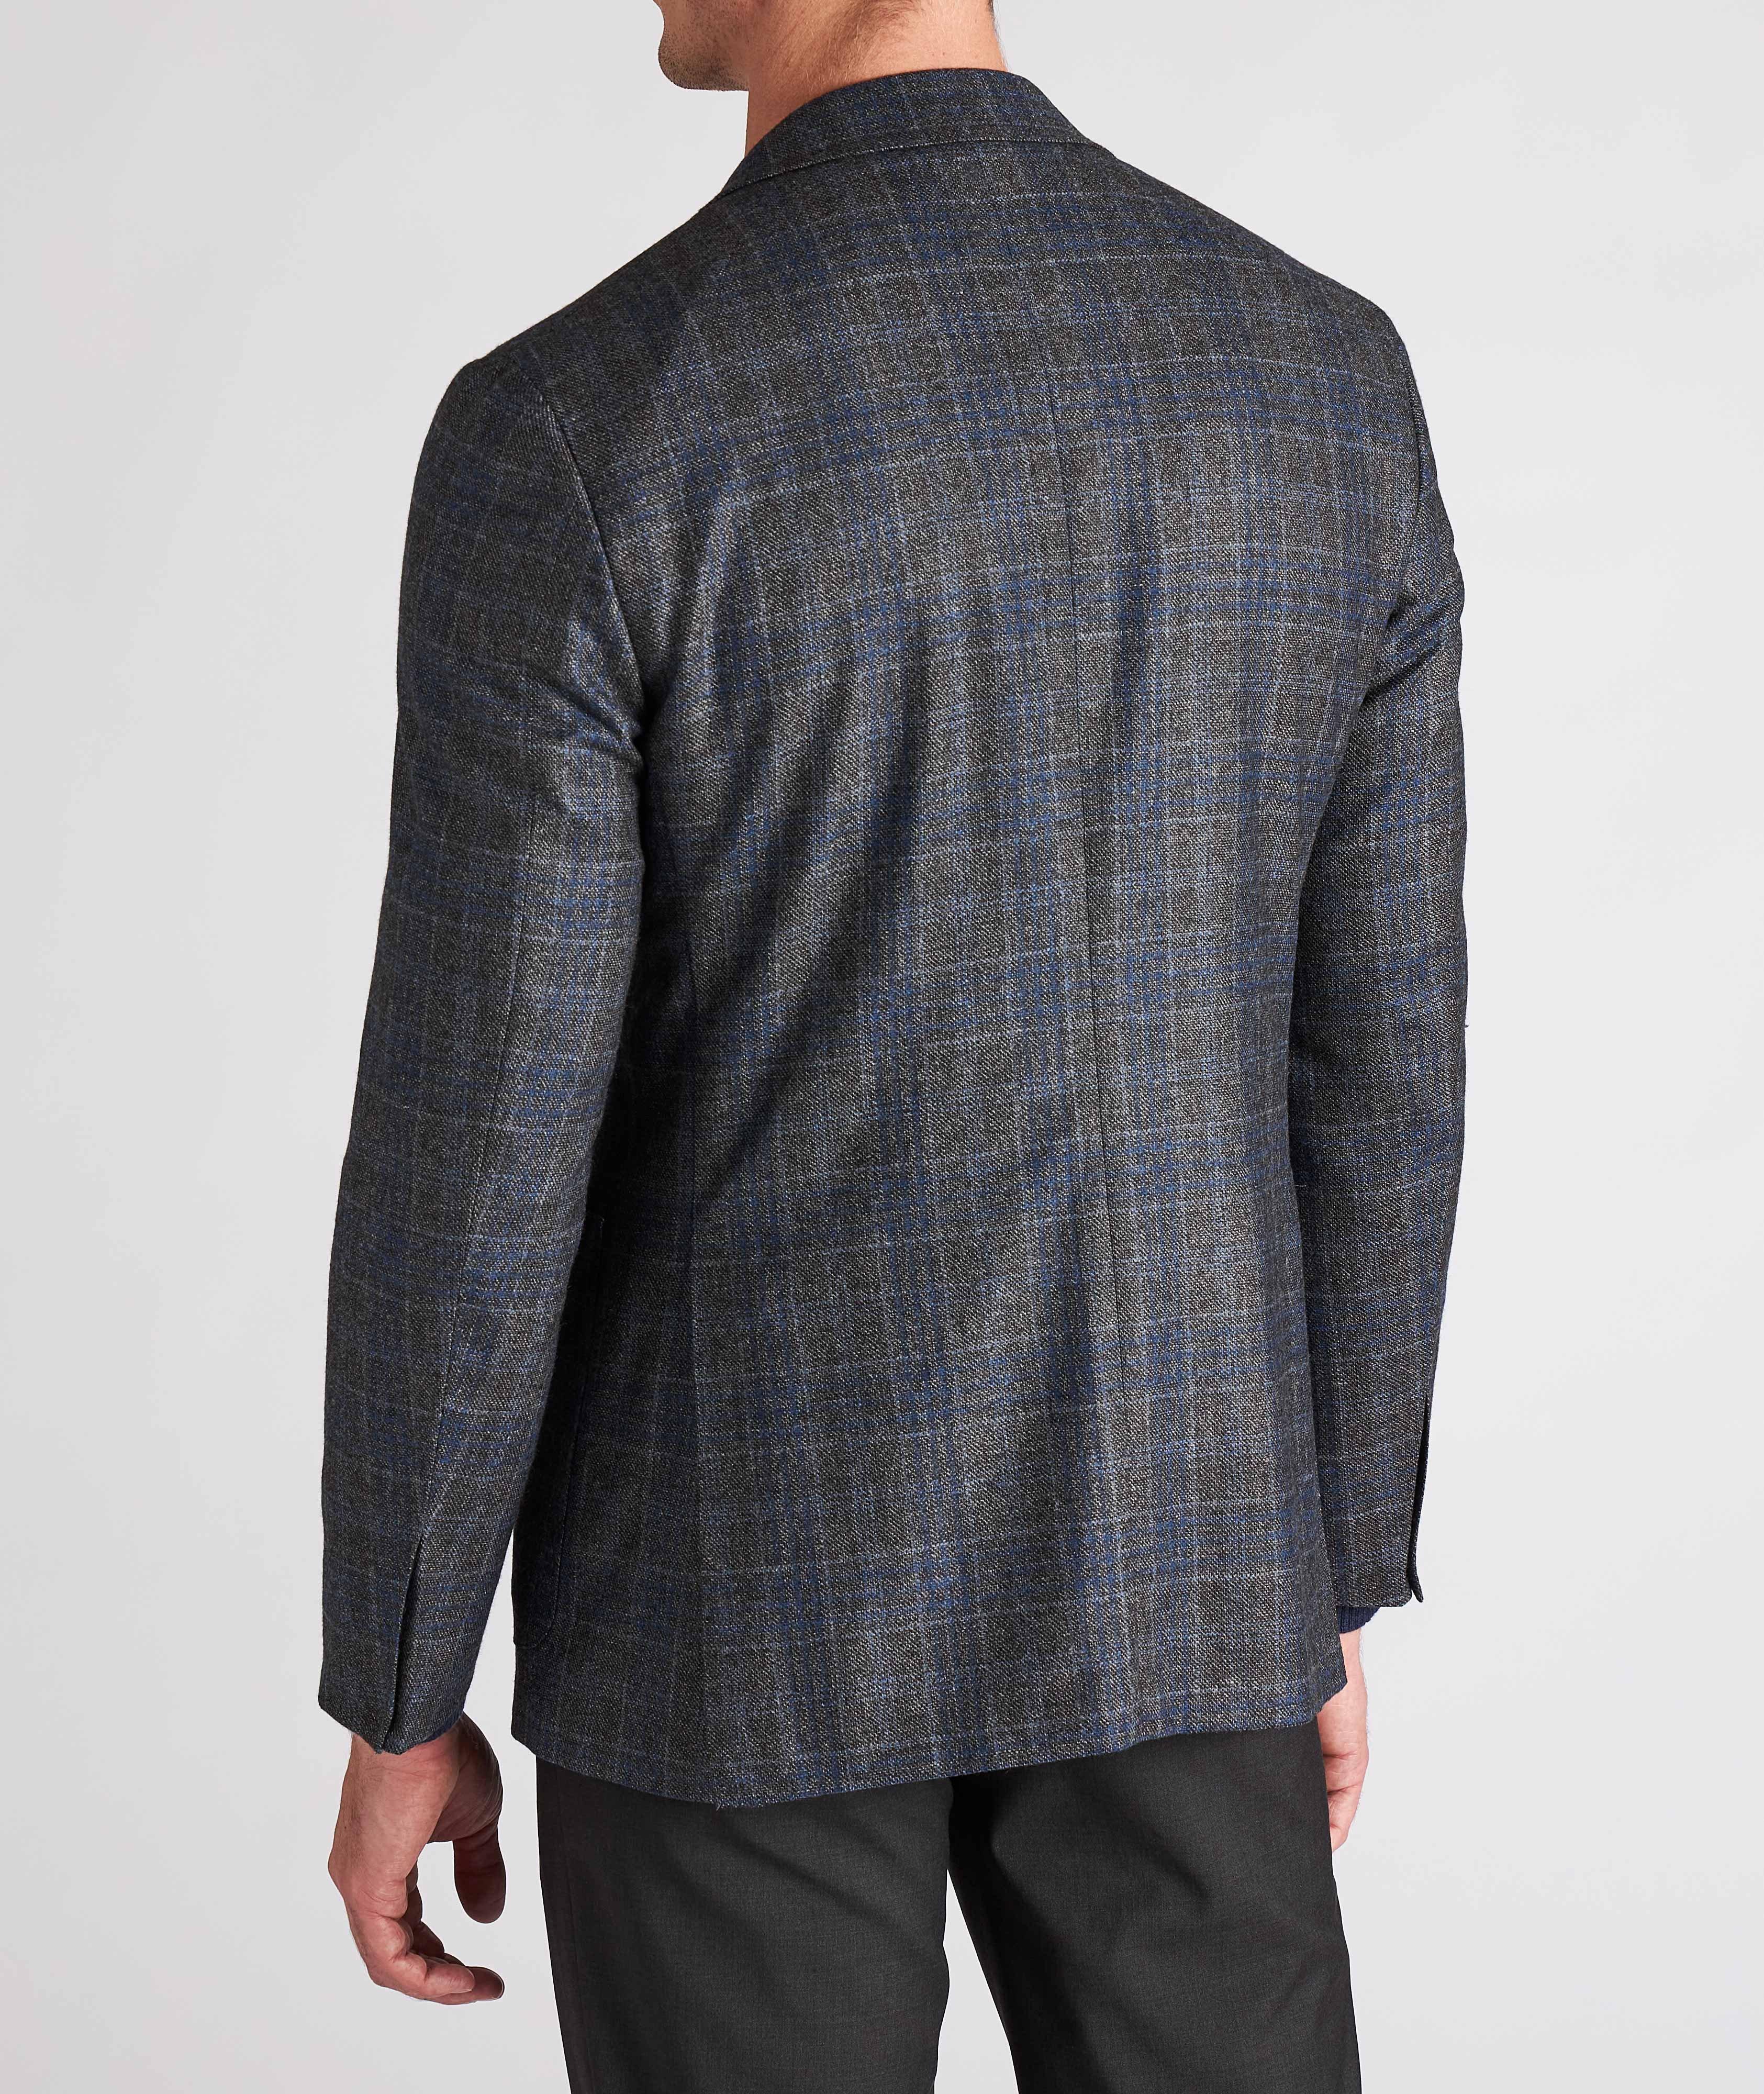 Slim Fit Checked Wool Sports Jacket image 2